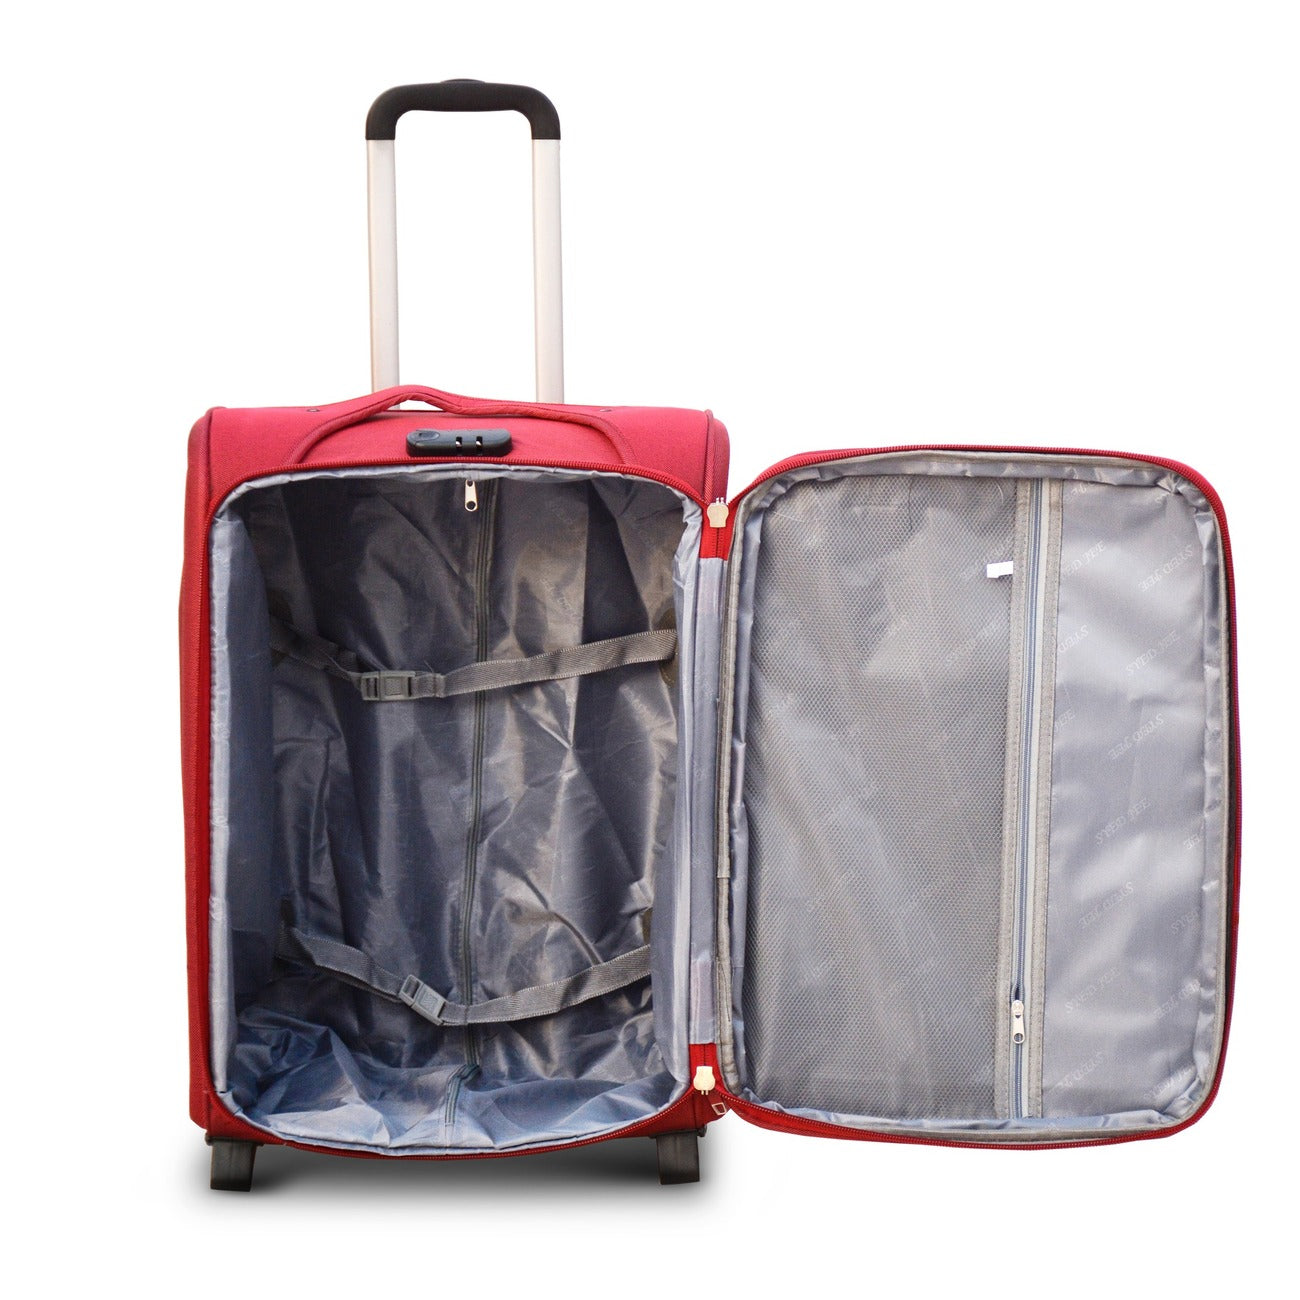 4 Piece Set 20" 24" 28" 32 Inches Red SJ JIAN 2 Wheel Lightweight Soft Material Luggage Bag